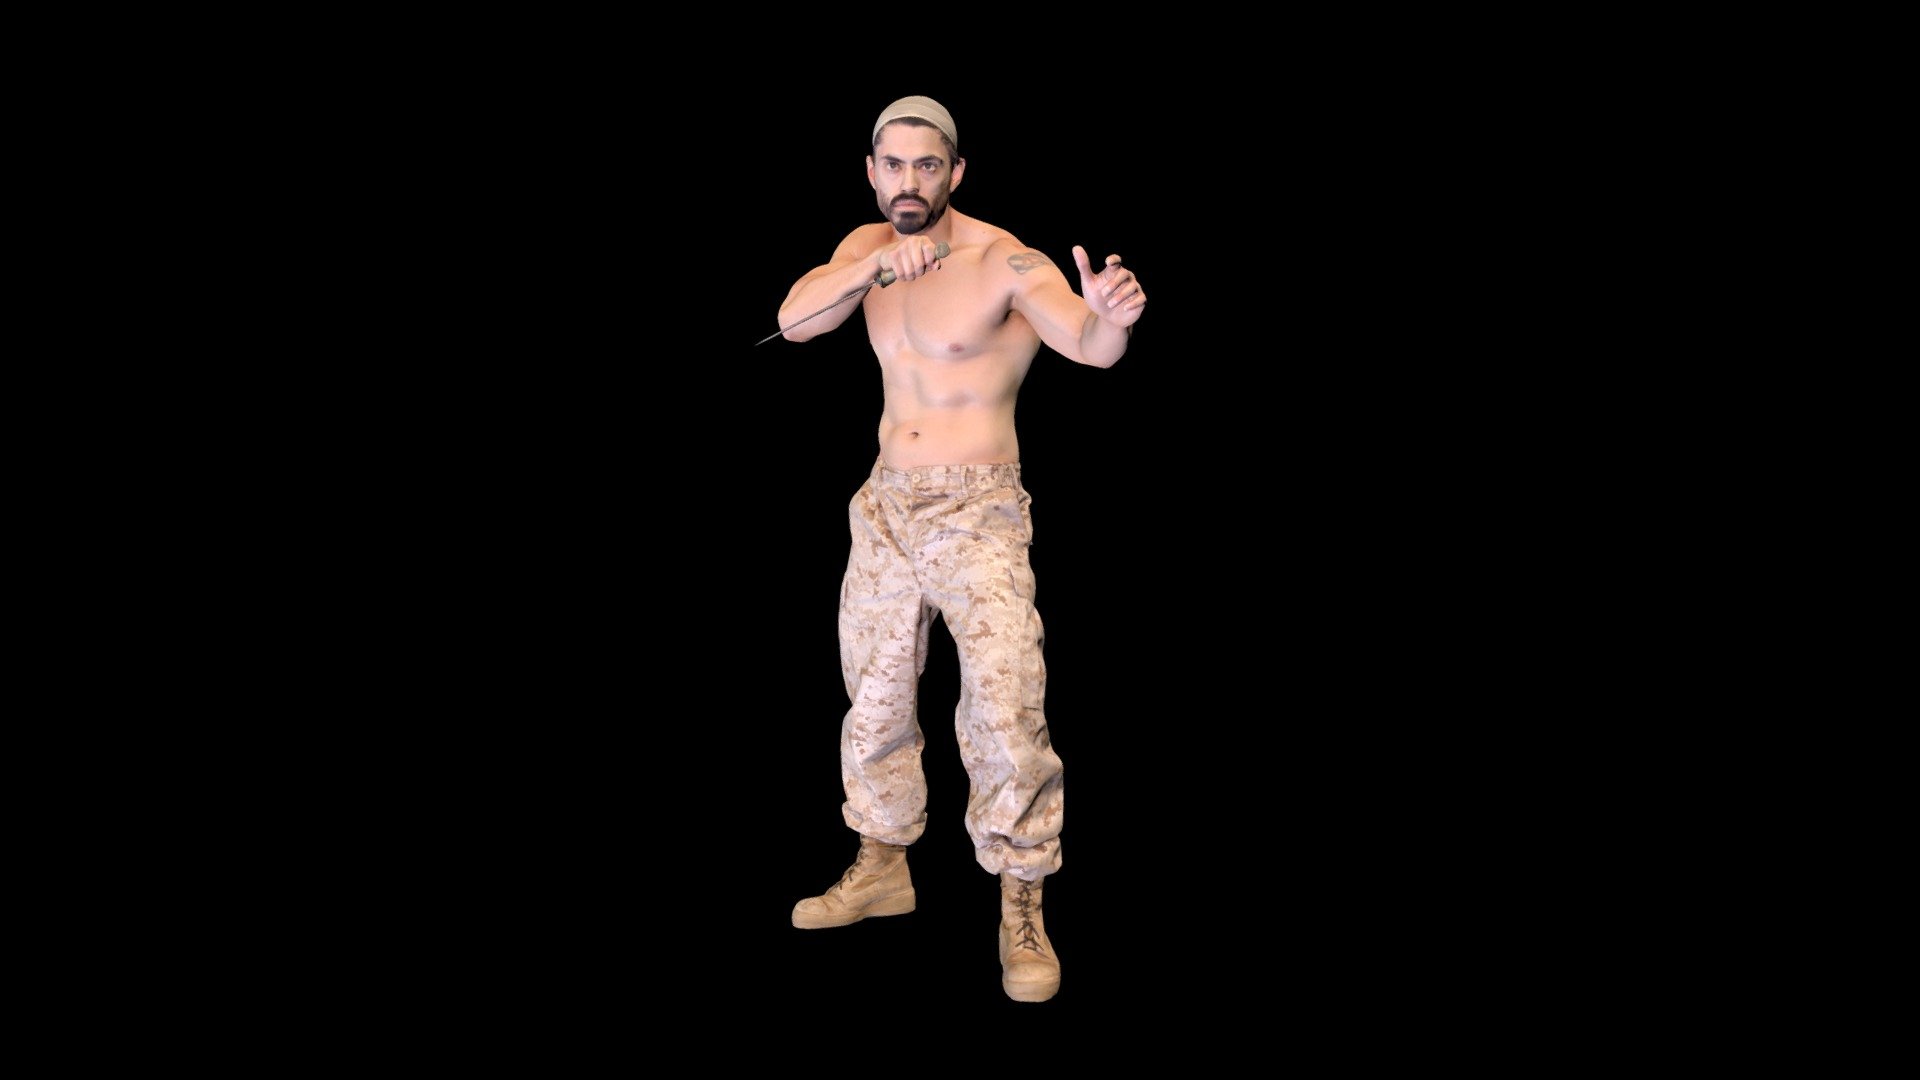 Victor holding a knife stance.

Product Features:




Game Engine and PBR ready

High Poly

Textures:

All maps are in PNG format.




Diffuse Map (8192x8192)

Specular Map (8192x8192)

Roughness Map (8192x8192)

Normal Map (8192x8192)

SSS Map (8192x8192)

Model Polycounts:




160020 Faces

80000 Vertices

Available File Formats:




OBJ

FBX

About Human Engine:

Using our 150 DSLR Photogrammetry rig, we create 3D and 4D assets for Games, VFX, Movies, Television, Virtual Reality and Augmented Reality. From 3D scanning to rigging, game-engine integration, we have your character creation needs covered 3d model